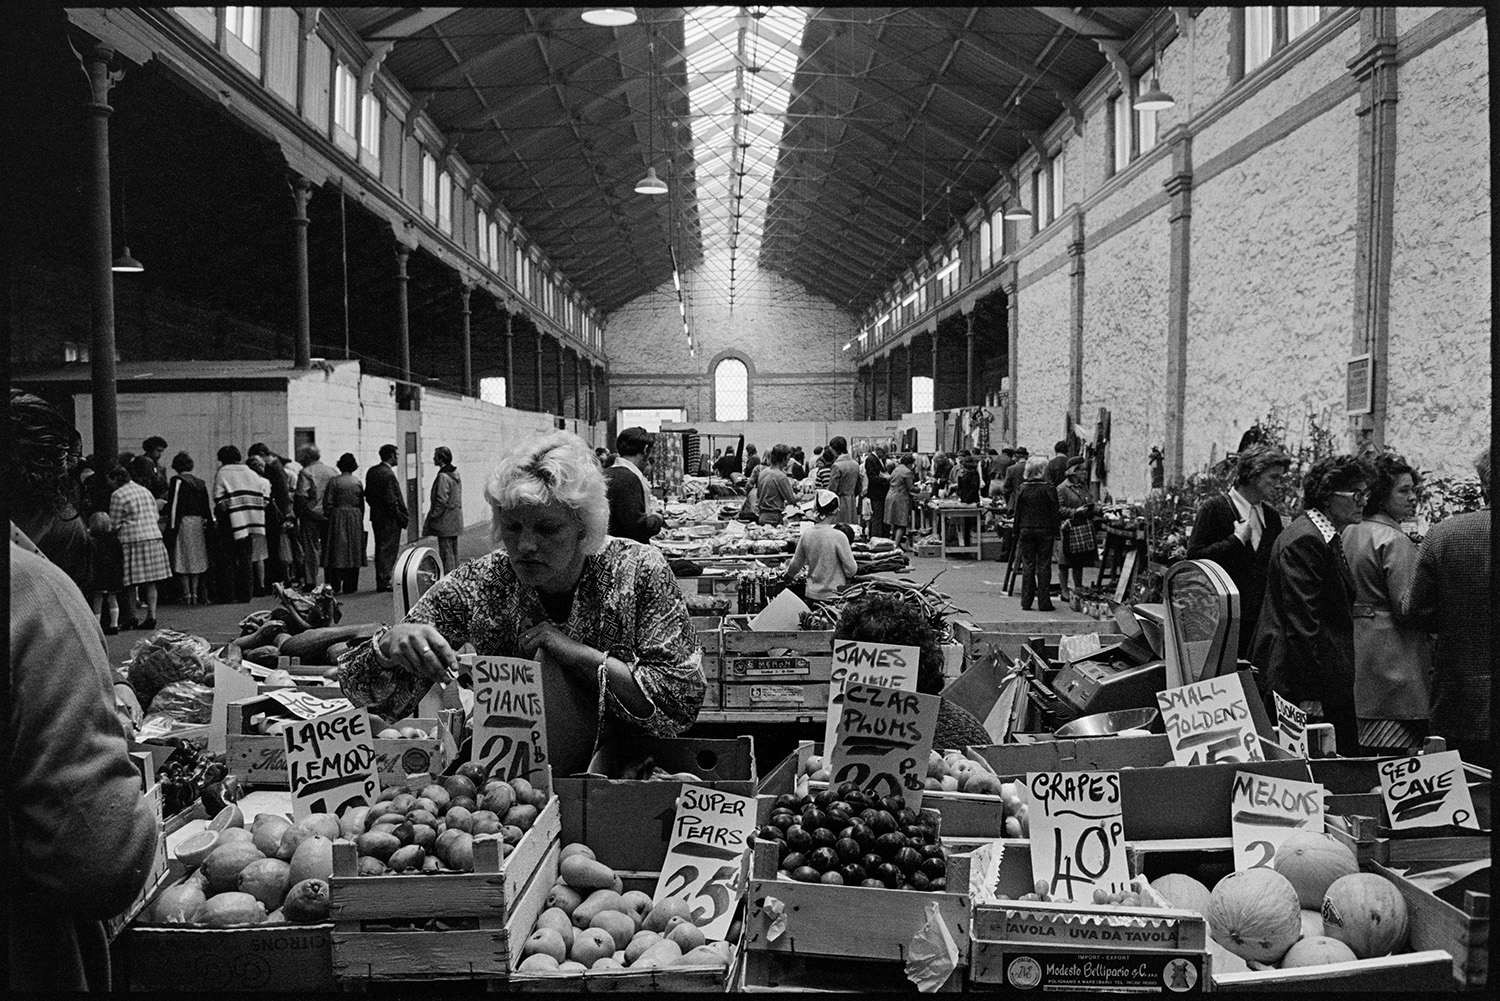 Cloth stall in market. 
[A woman running a fruit stall at South Molton Pannier Market. The stall has lemons, pears, plums and melons, amongst other fruit. Shoppers can be seen looking at other stalls in the background.]